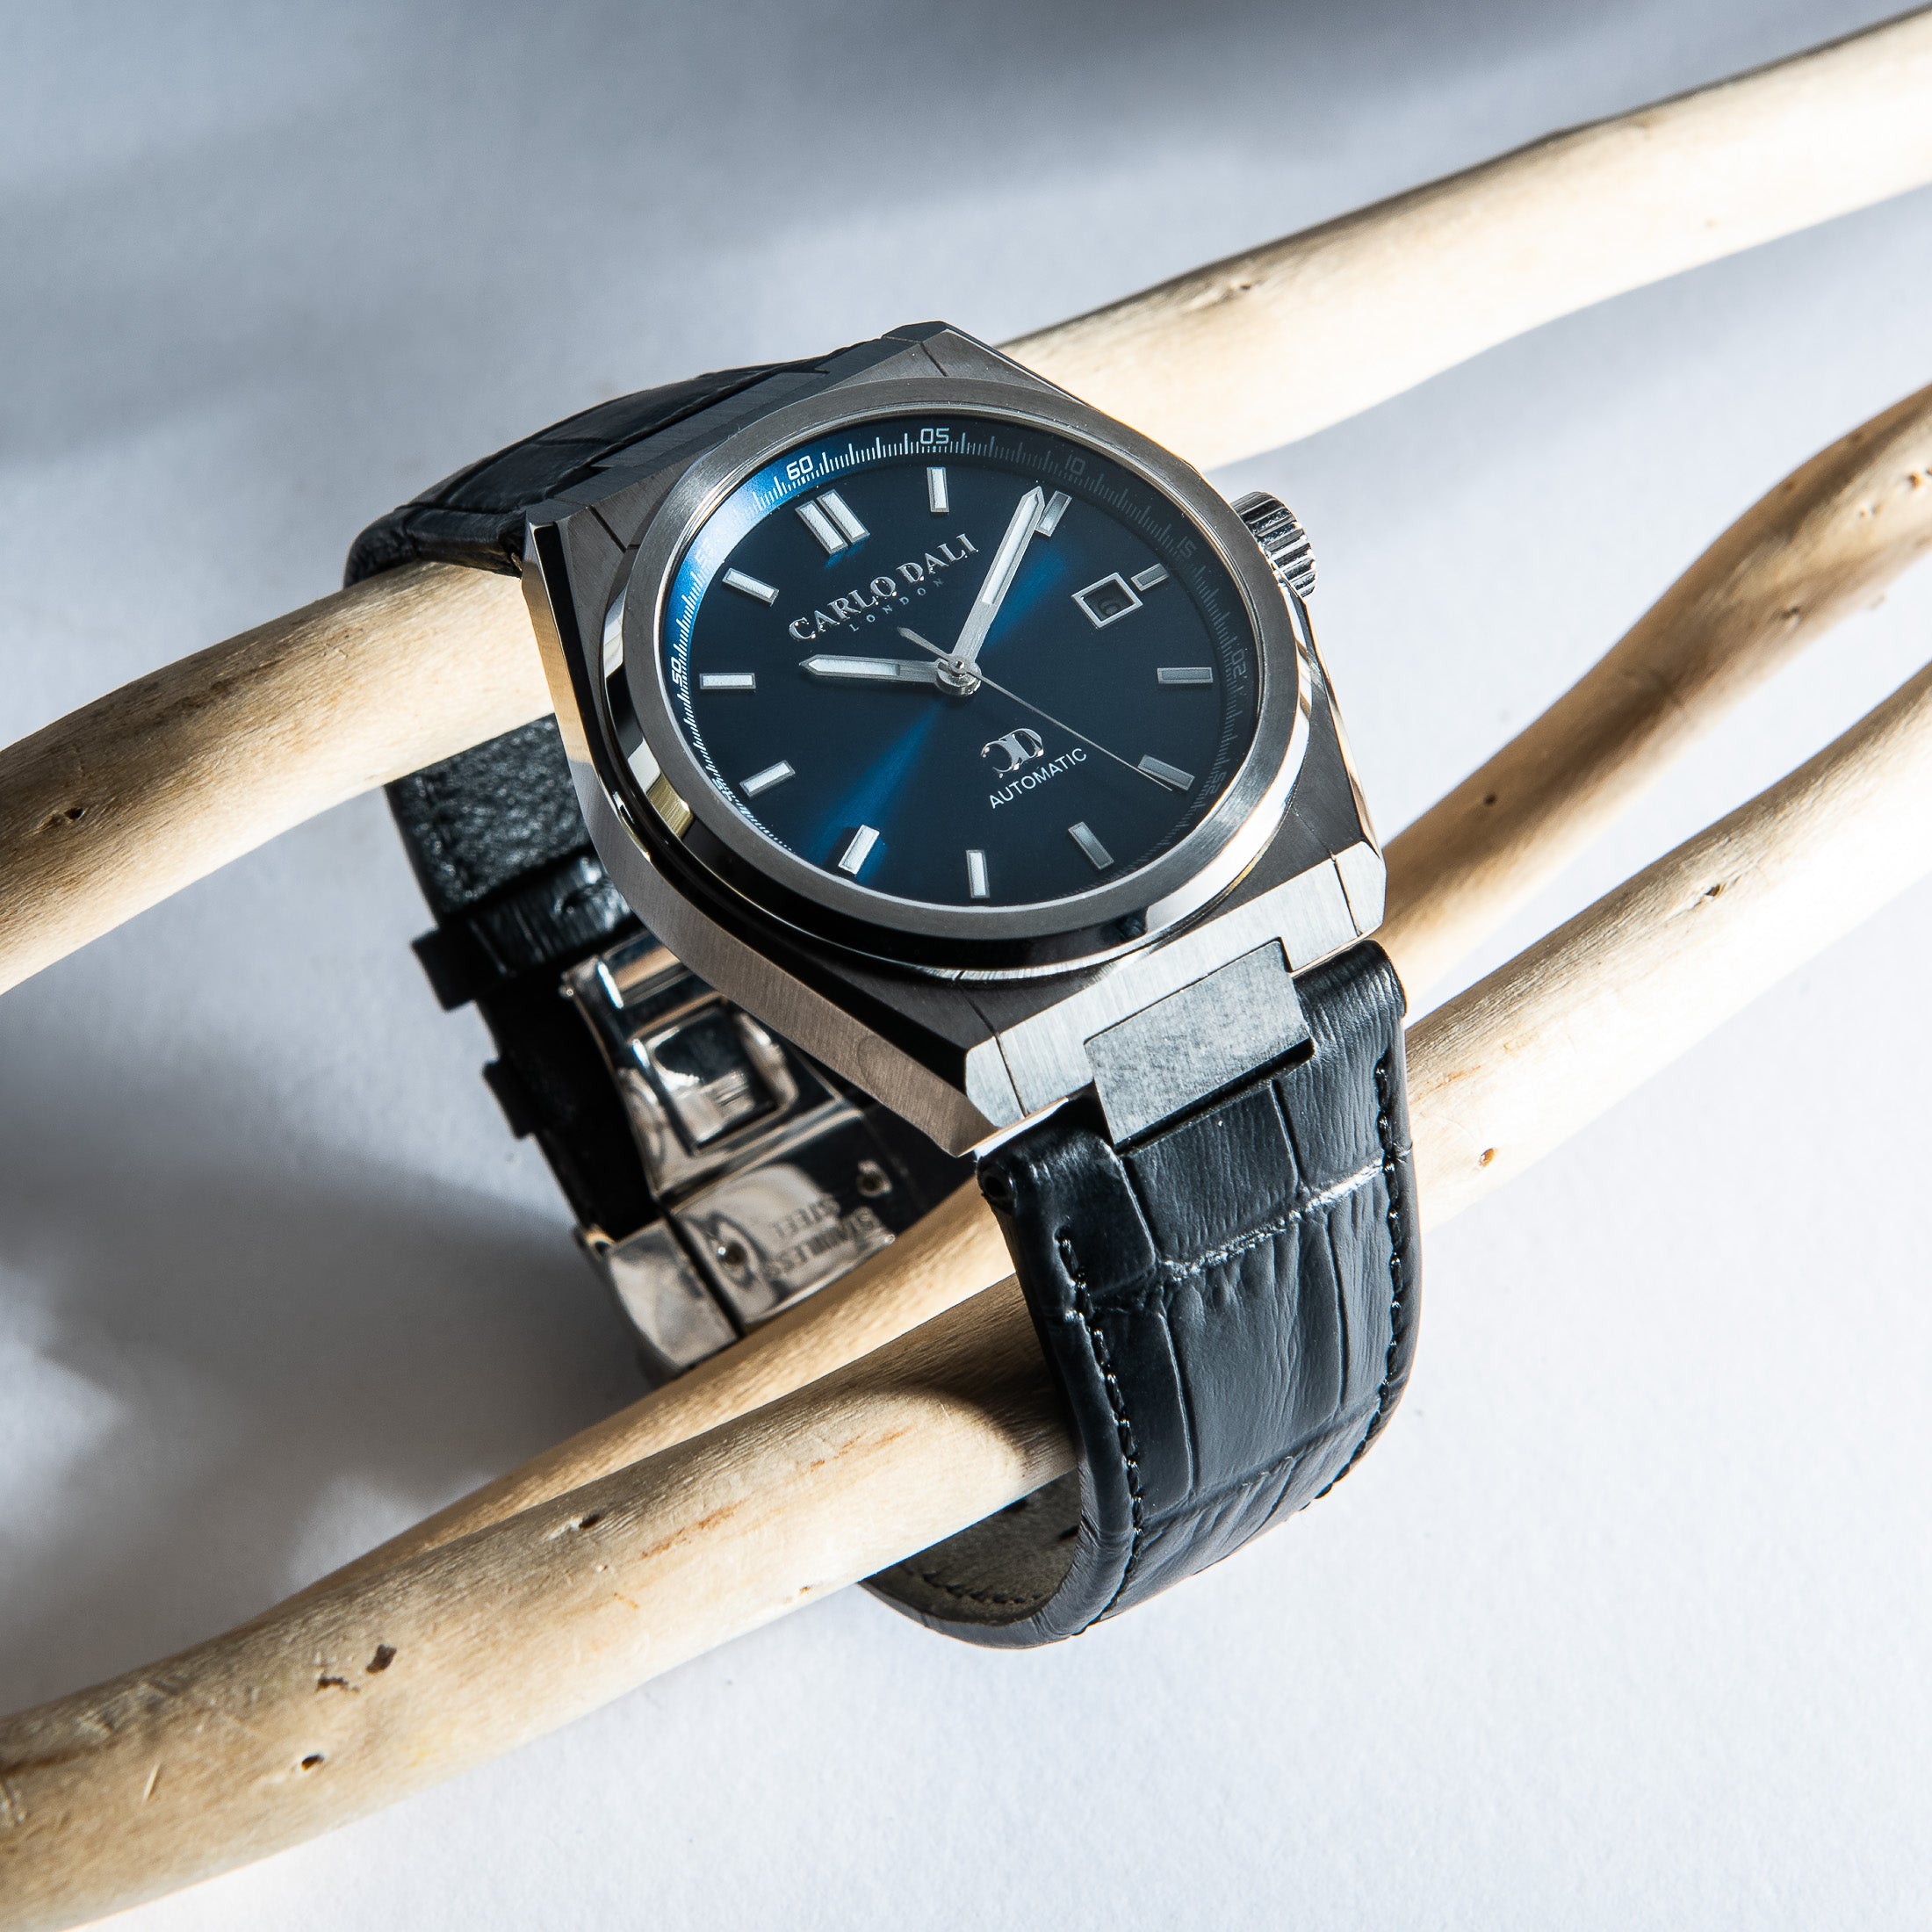 "1888 automatic" BLACK, SILVER & BLUE LEATHER WATCH